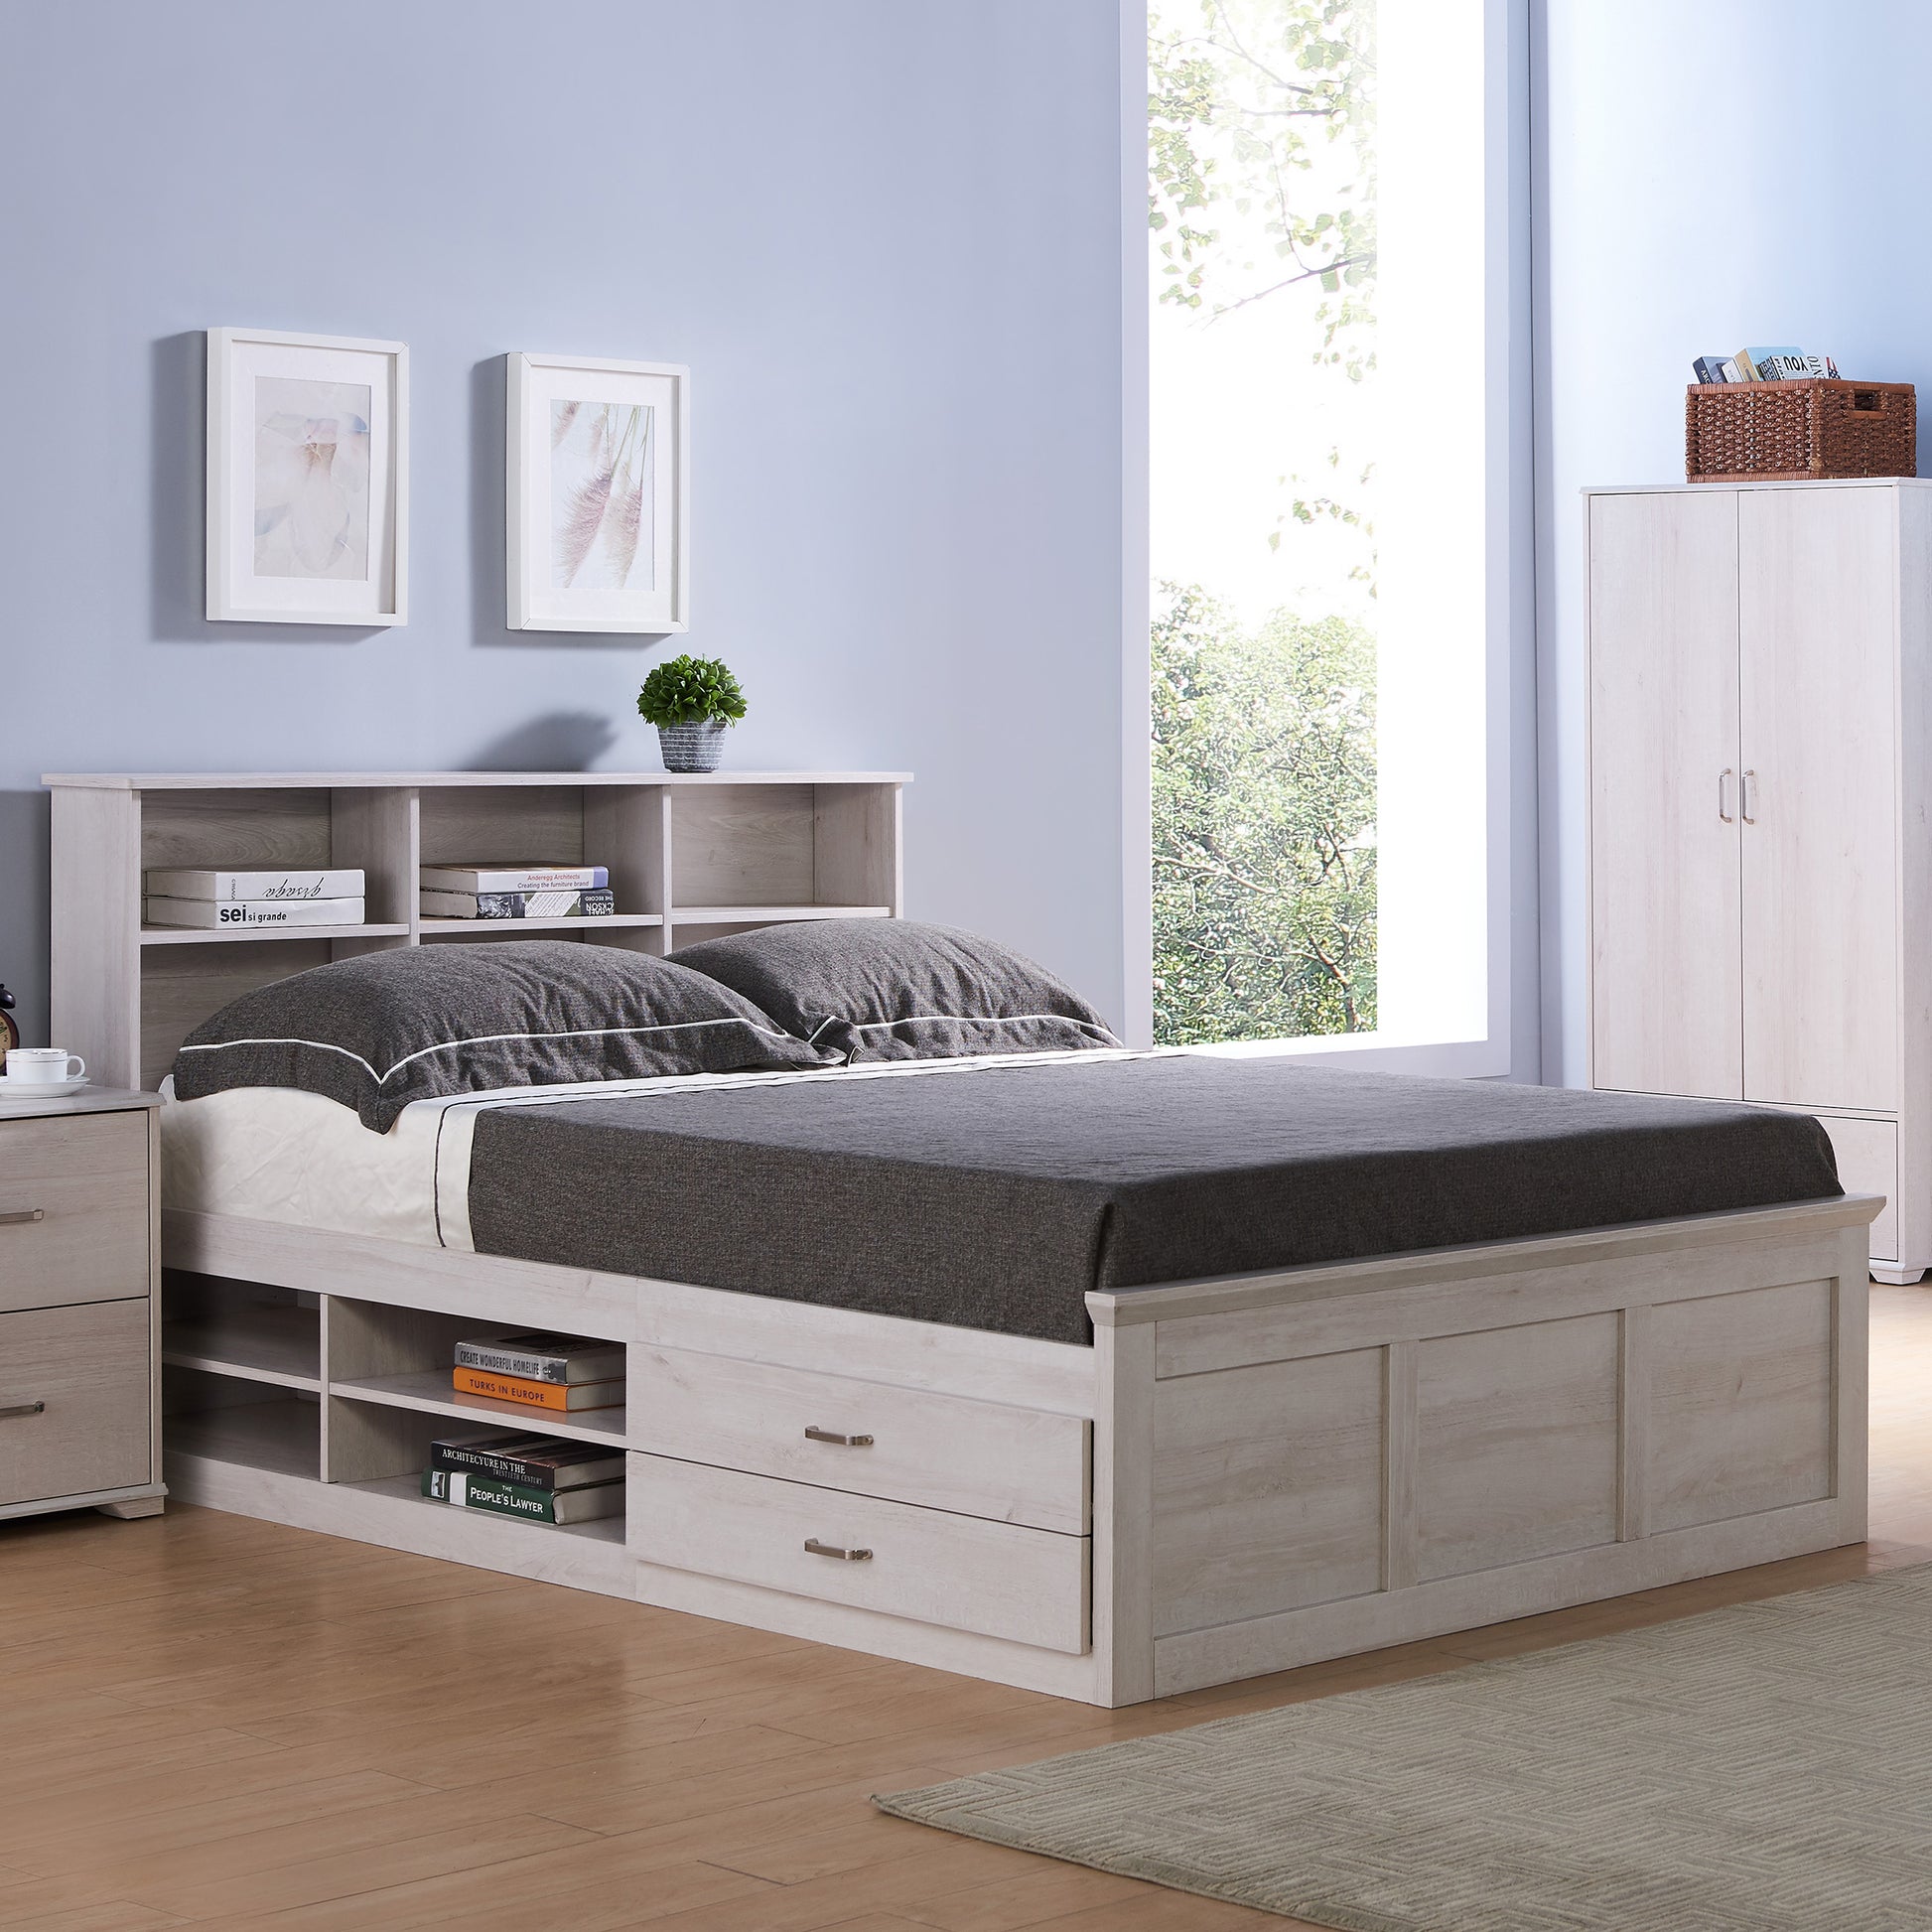 Right angled transitional white two-drawer four-shelf storage bed shown with optional bookcase headboard in a bedroom with accessories